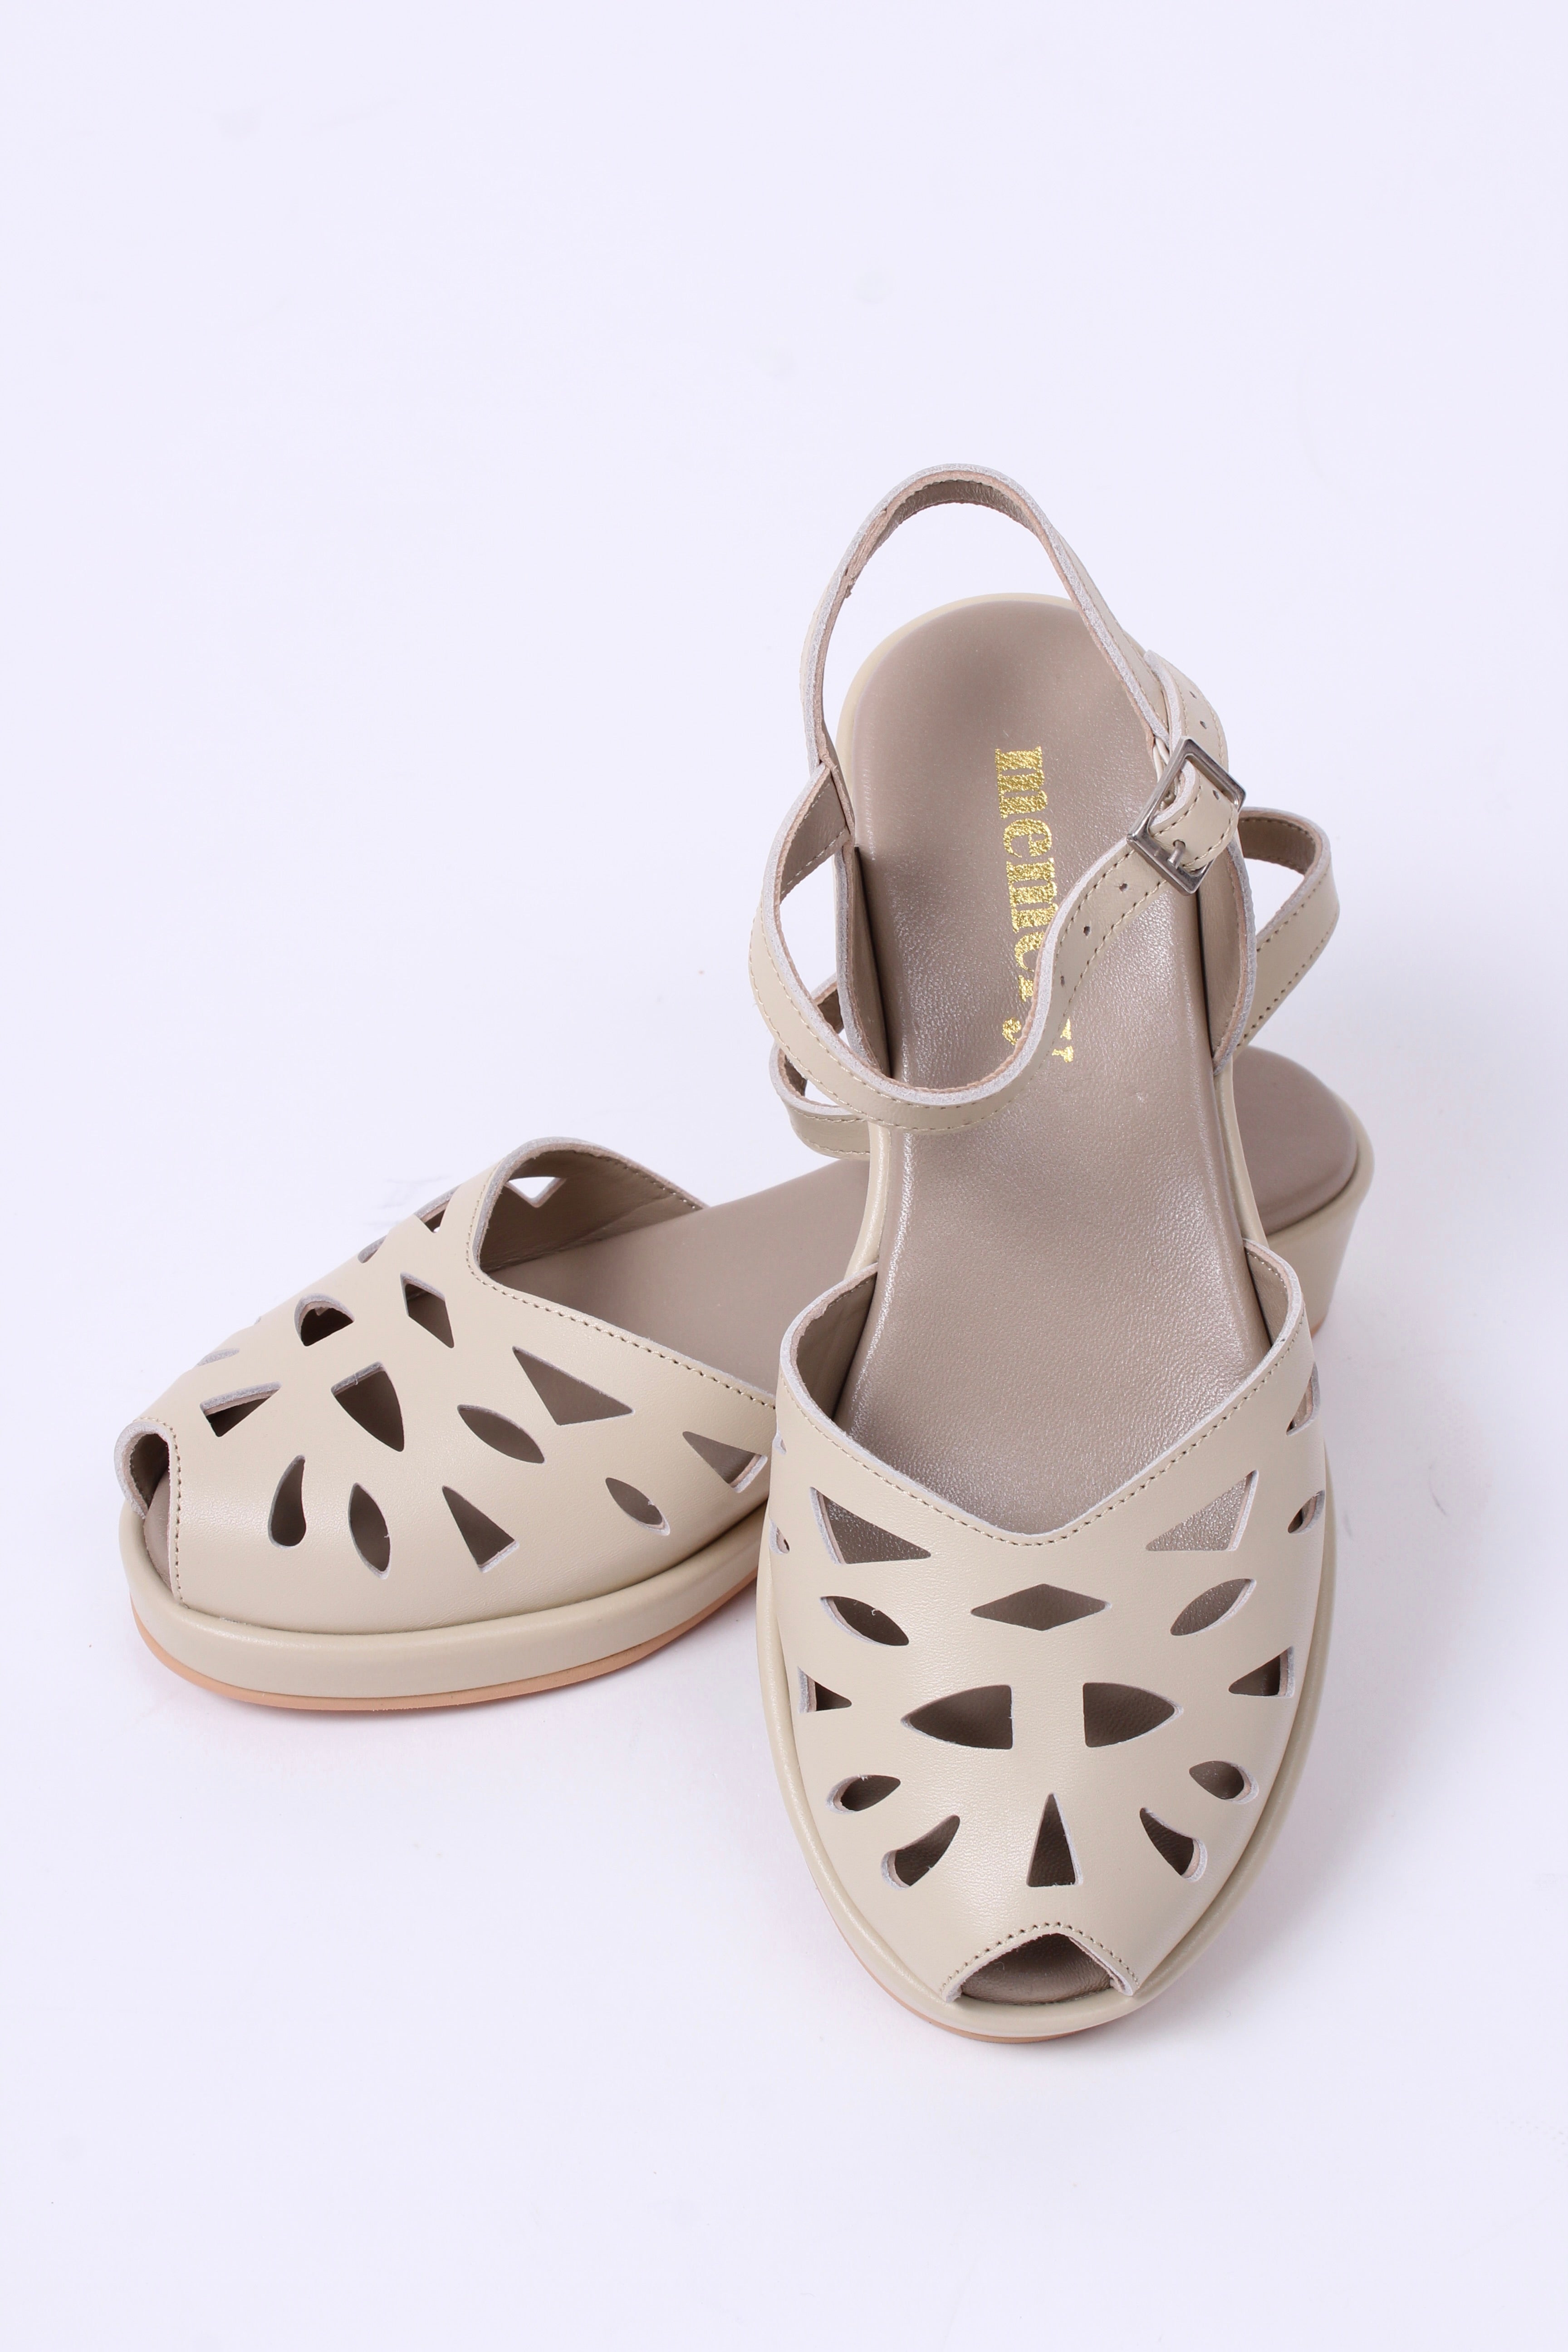 1940s / 50s style summer sandals /  wedges - Cream - Sidse